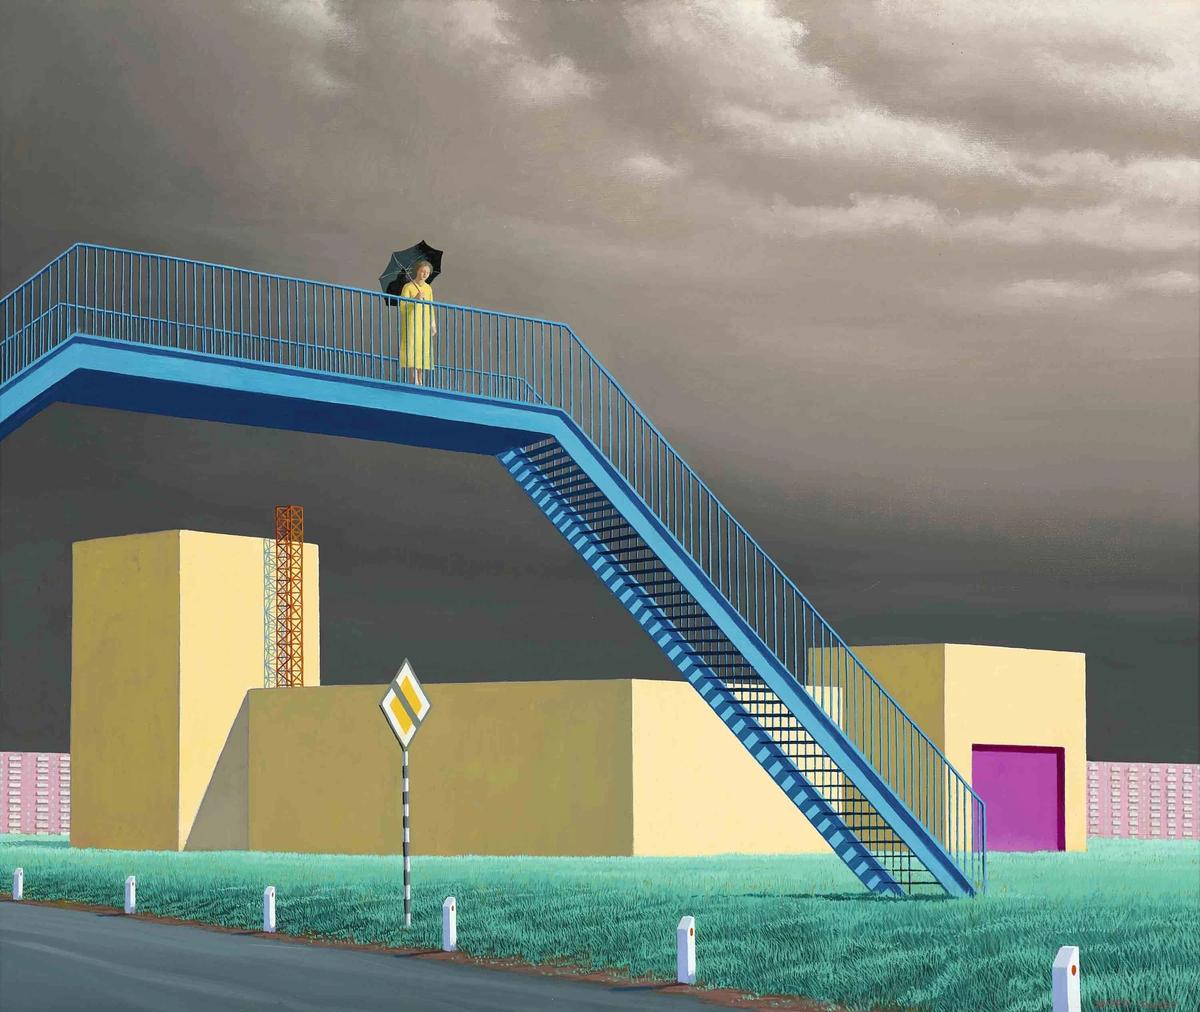 Jeffrey Smart's The Footbridge (1975) will be included in the sale of the bank's collection

